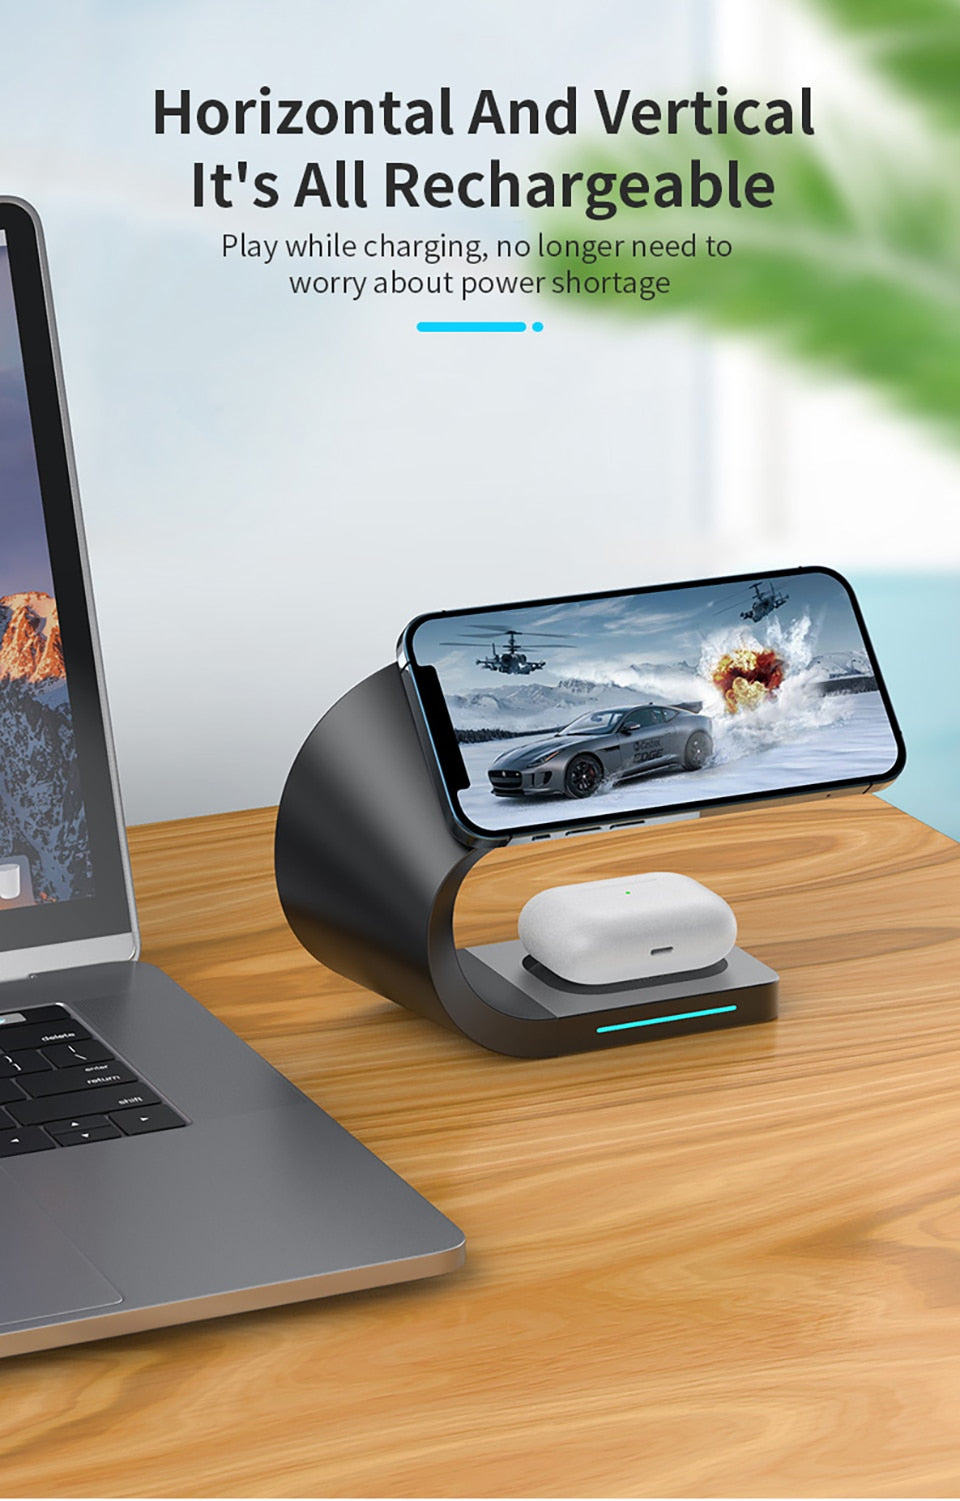 MagCharge: Ultimate 4-in-1 Wireless Charging Hub for iPhone, Apple Watch, and AirPods